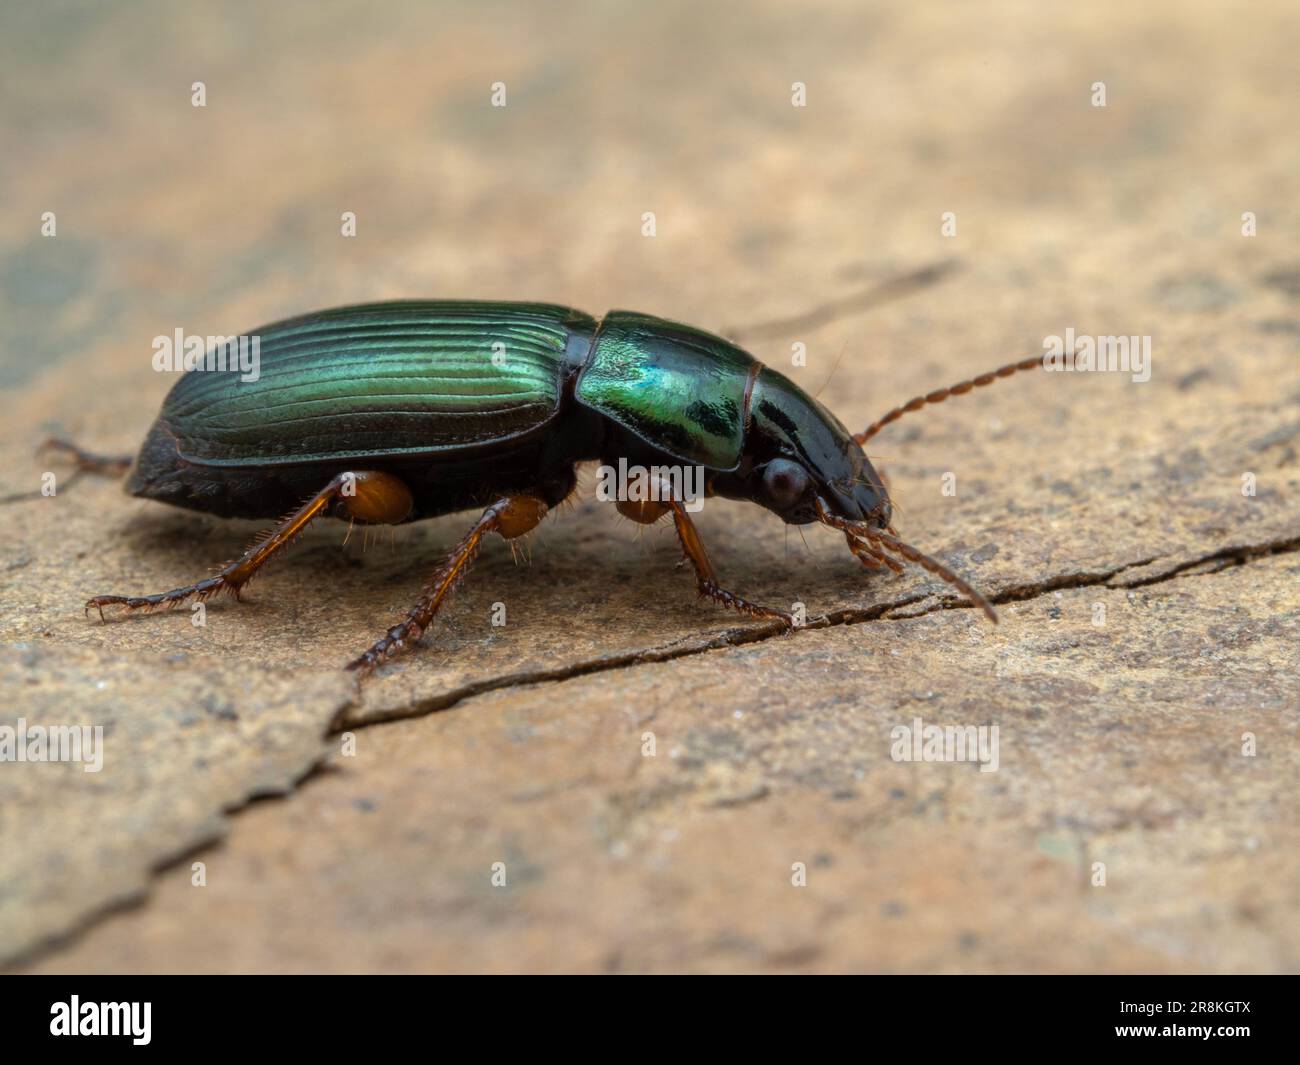 Colorful green european ground beetle (Harpalus affinis). This species has been introduced to North America. Stock Photo